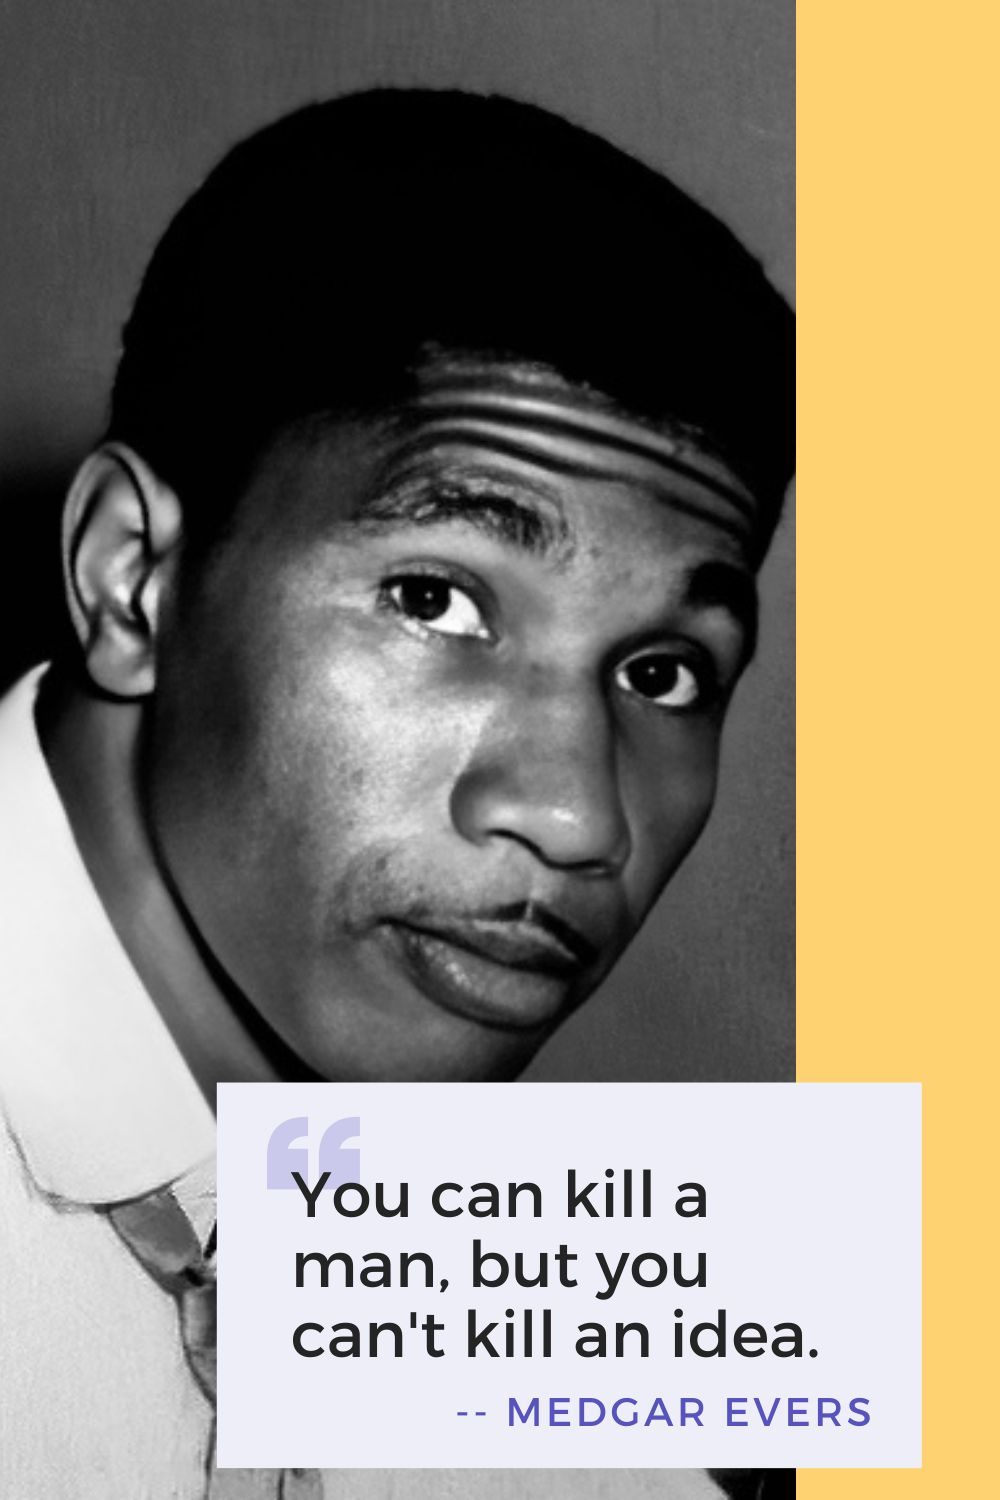 Medgar Evers Quotes - Pin 4 - JPG